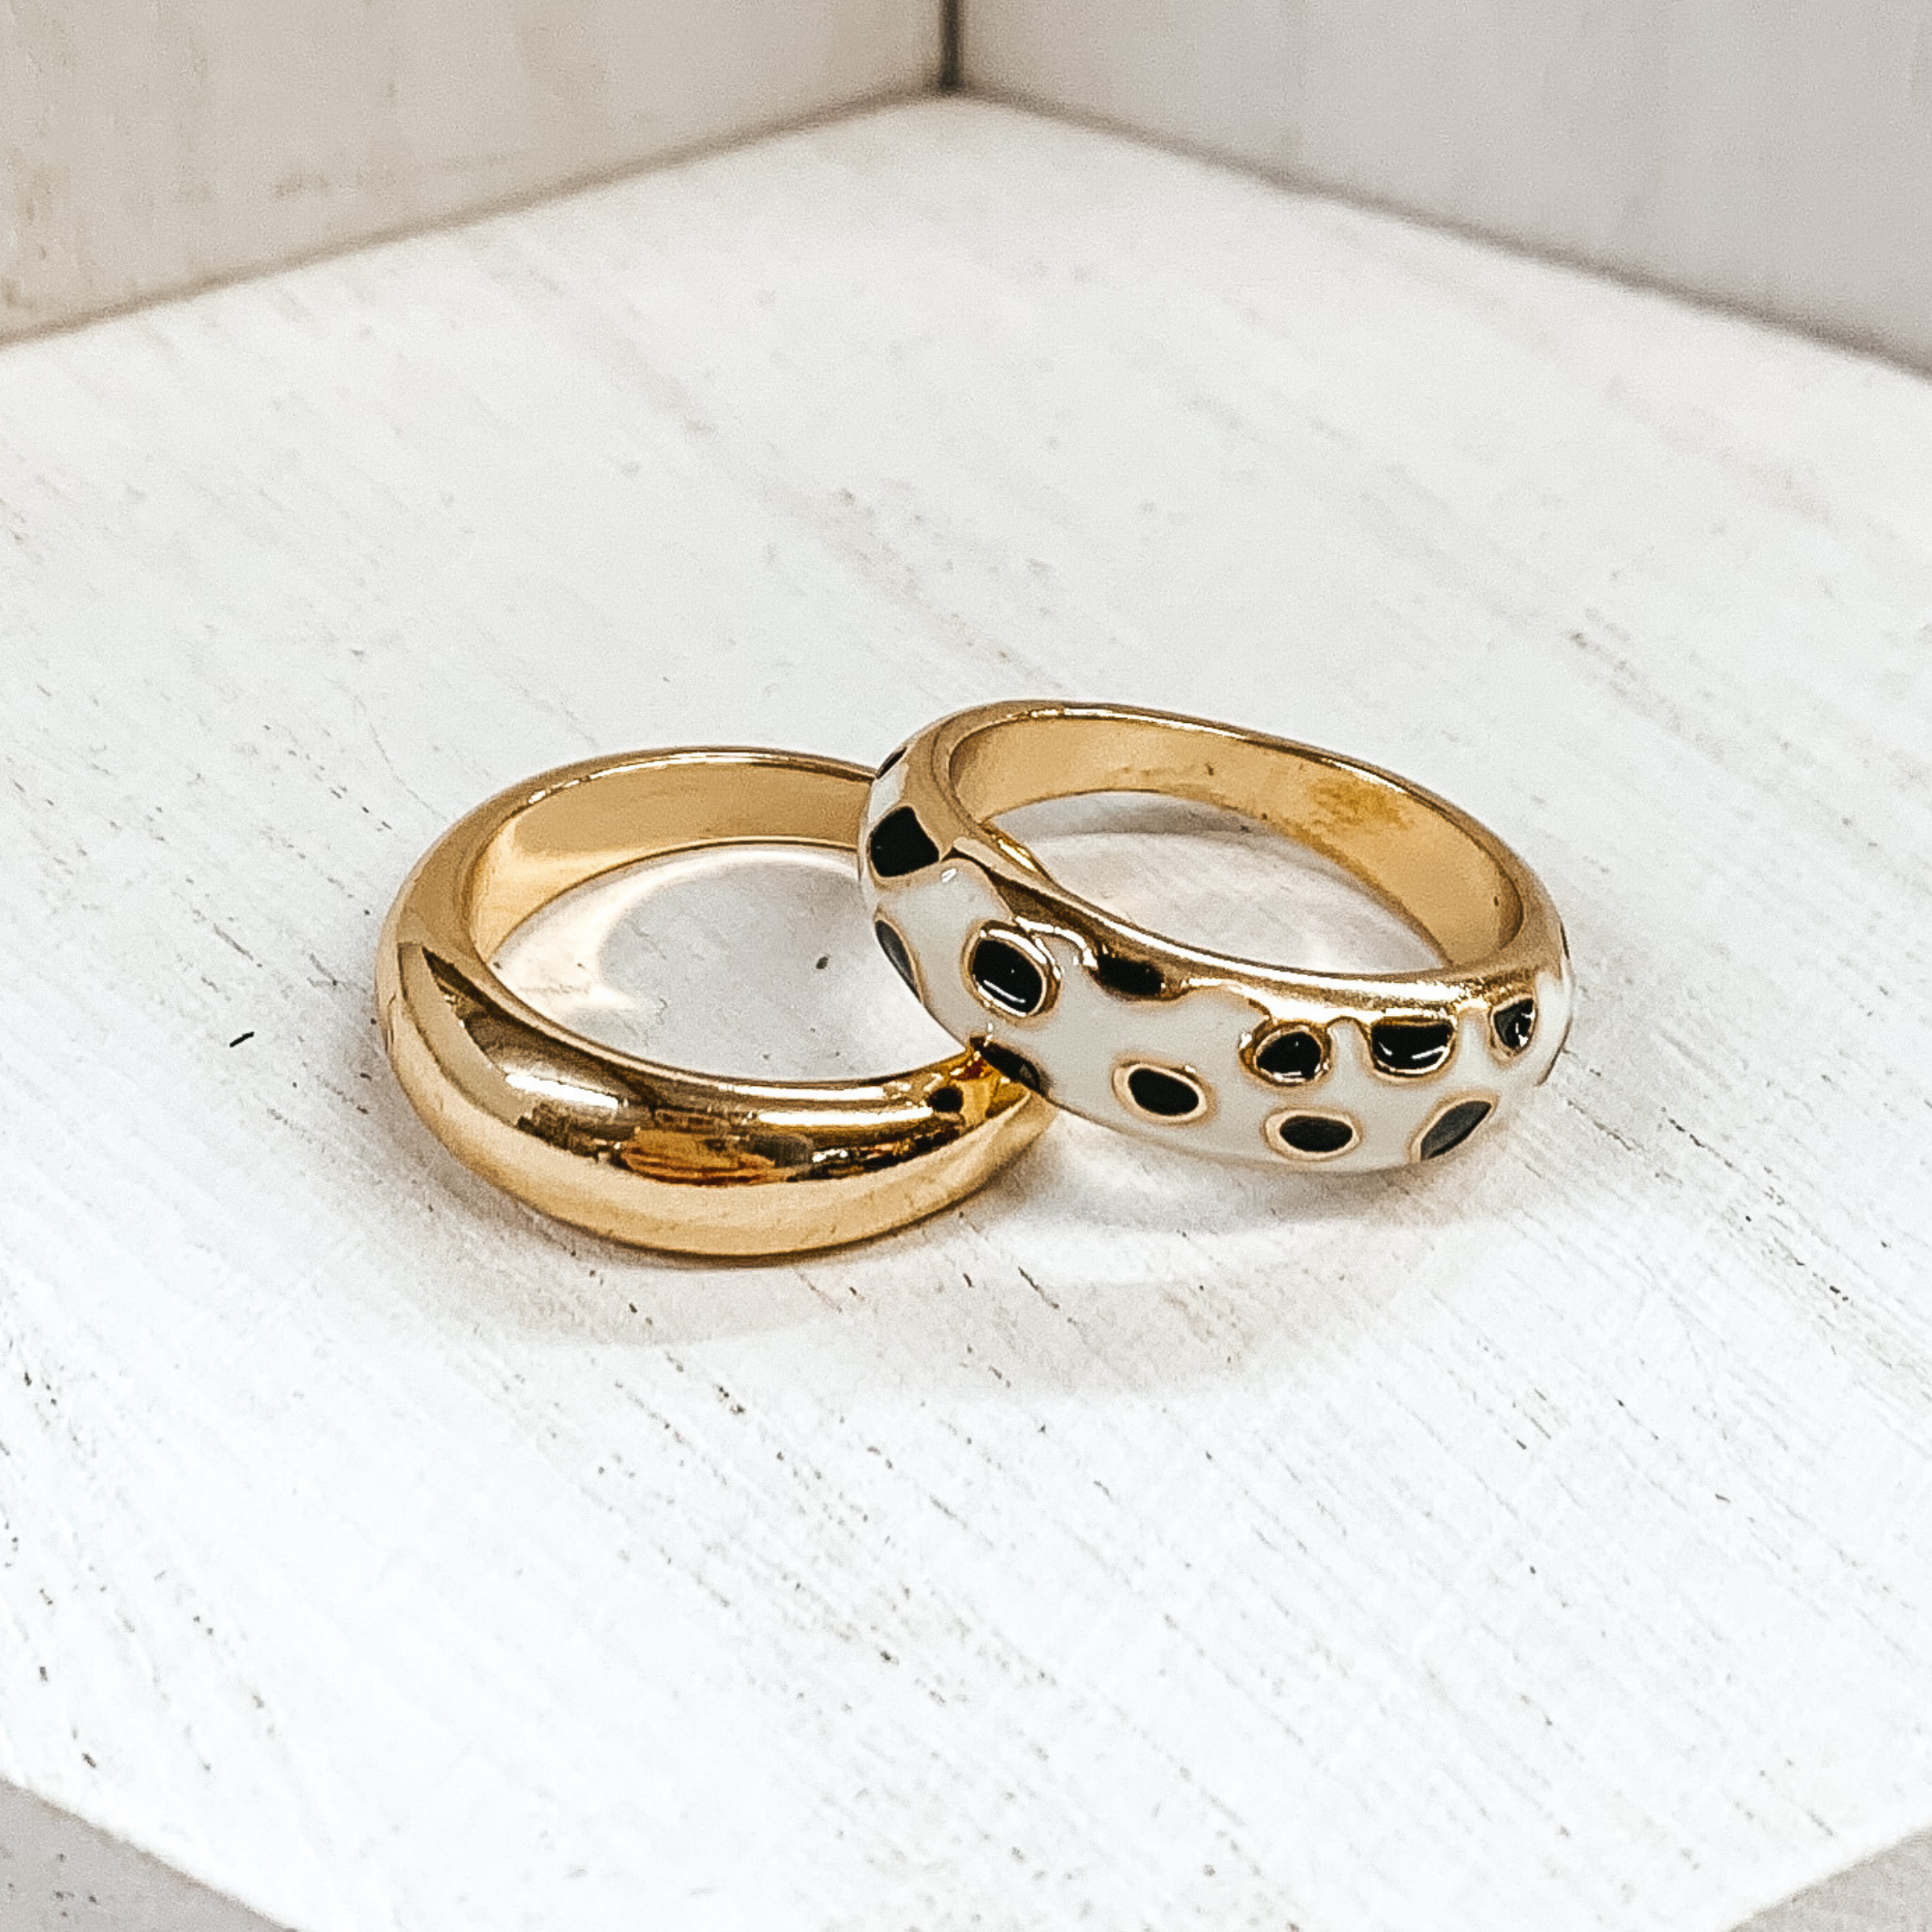 Set of two thick, gold rings. One ring is plain, while the secong ring has a white colored part with black cheetah print. These rings are pictured on a white background. 